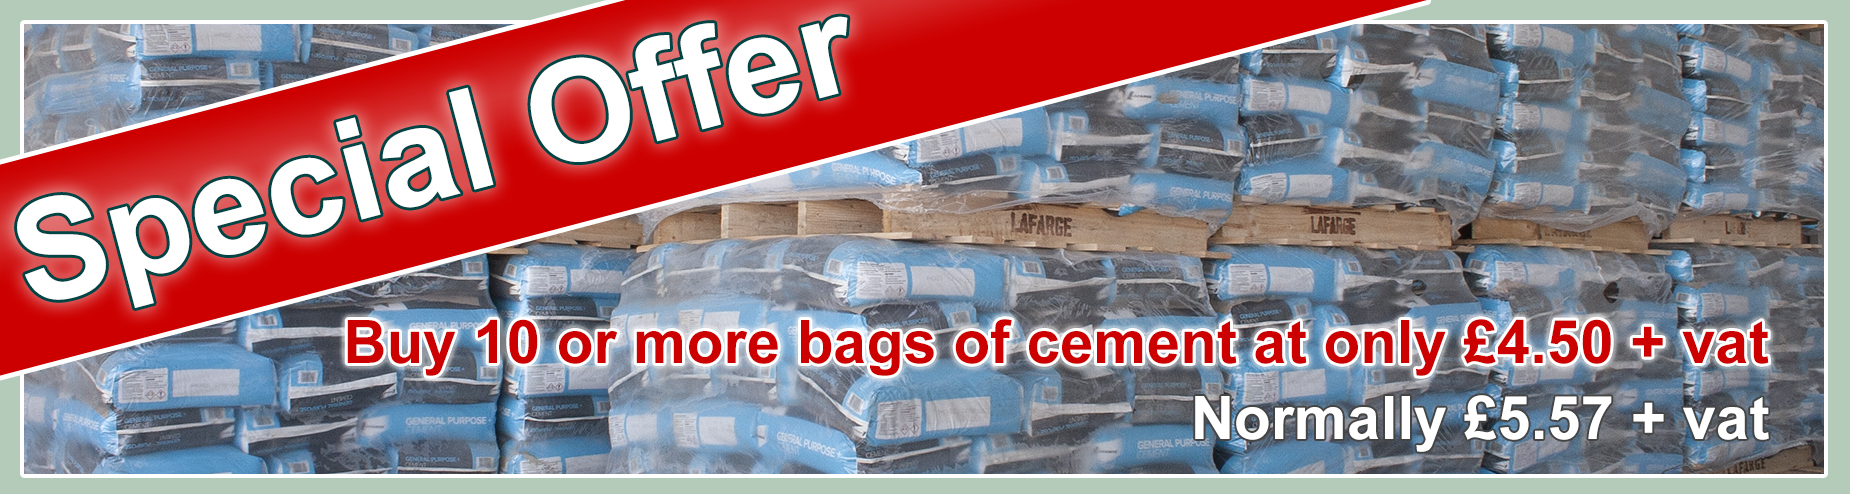 Special Offer on bulk purchases of bagged cement